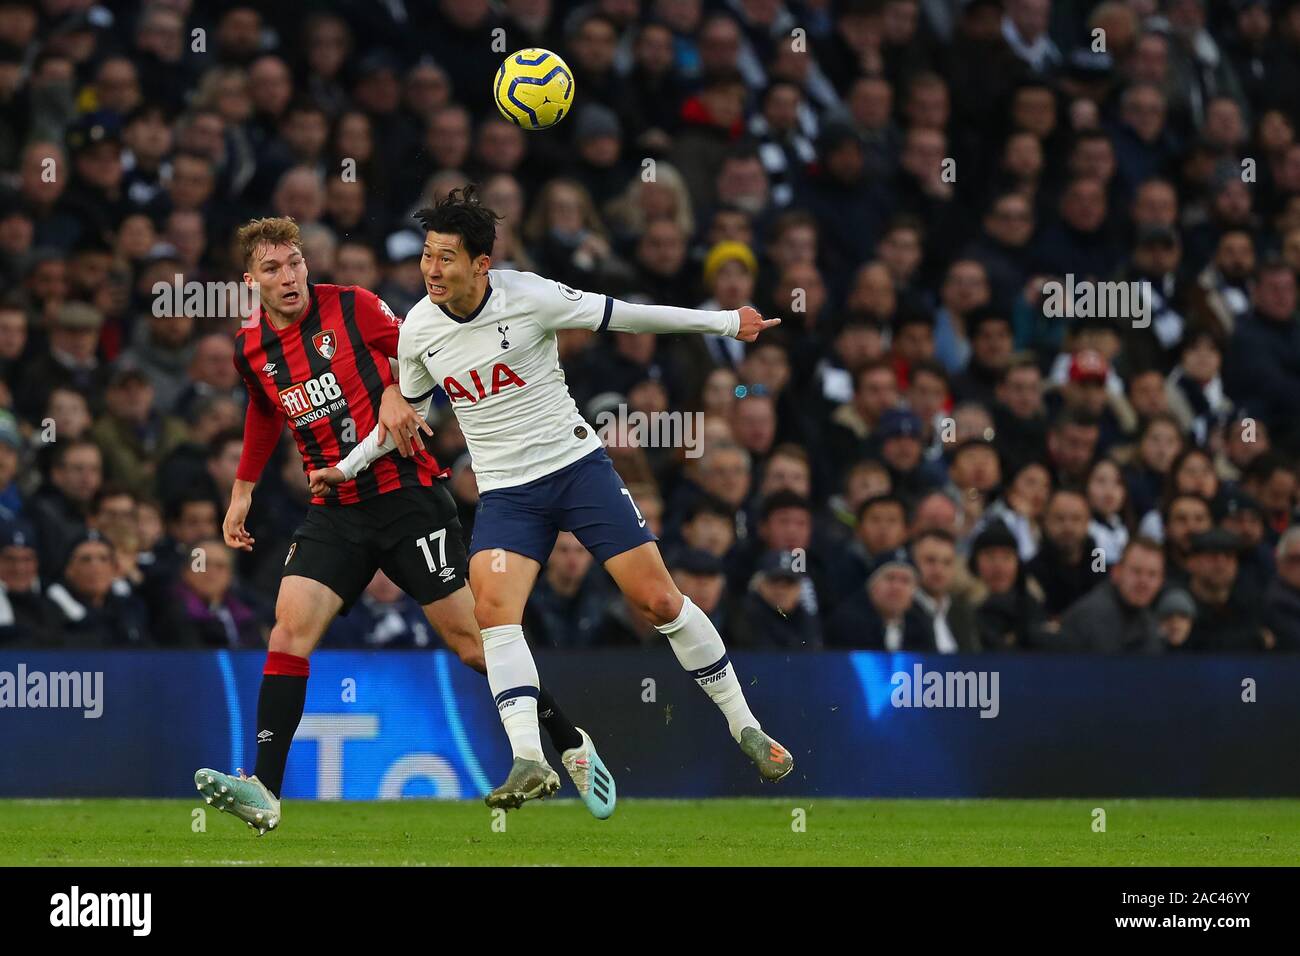 Bournemouth's defender Jack Stacey and Tottenham's forward Son Heung-Min compete for the ball during the Barclays Premier League match between Tottenham Hotspur and Bournemouth at the Tottenham Hotspur Stadium, London, England. On the 30th November 2019. (Photo by AFS/Espa-Images) Stock Photo